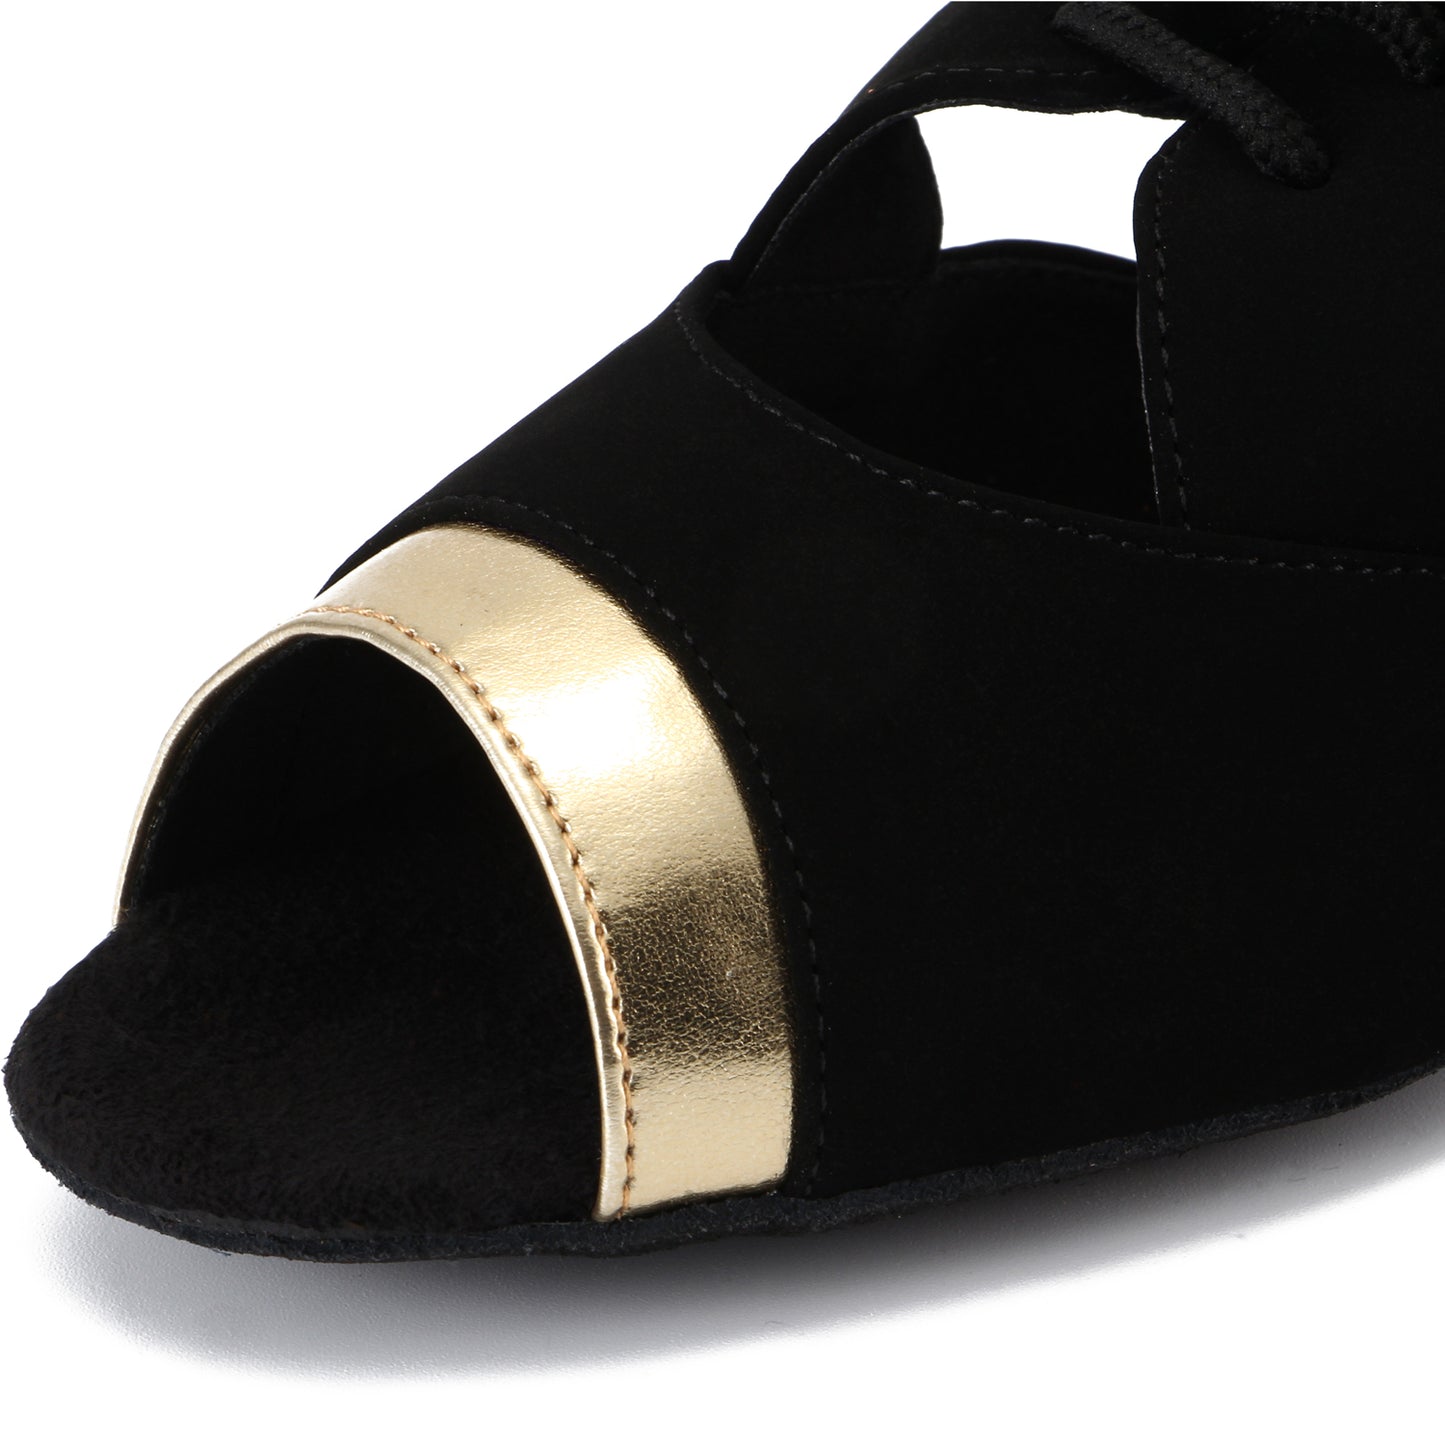 Women Ballroom Dancing Shoes Ladies Tango Latin Practice Dance Shoe Suede Sole Lace-up Open-toe Black and Gold (PD-3004A)